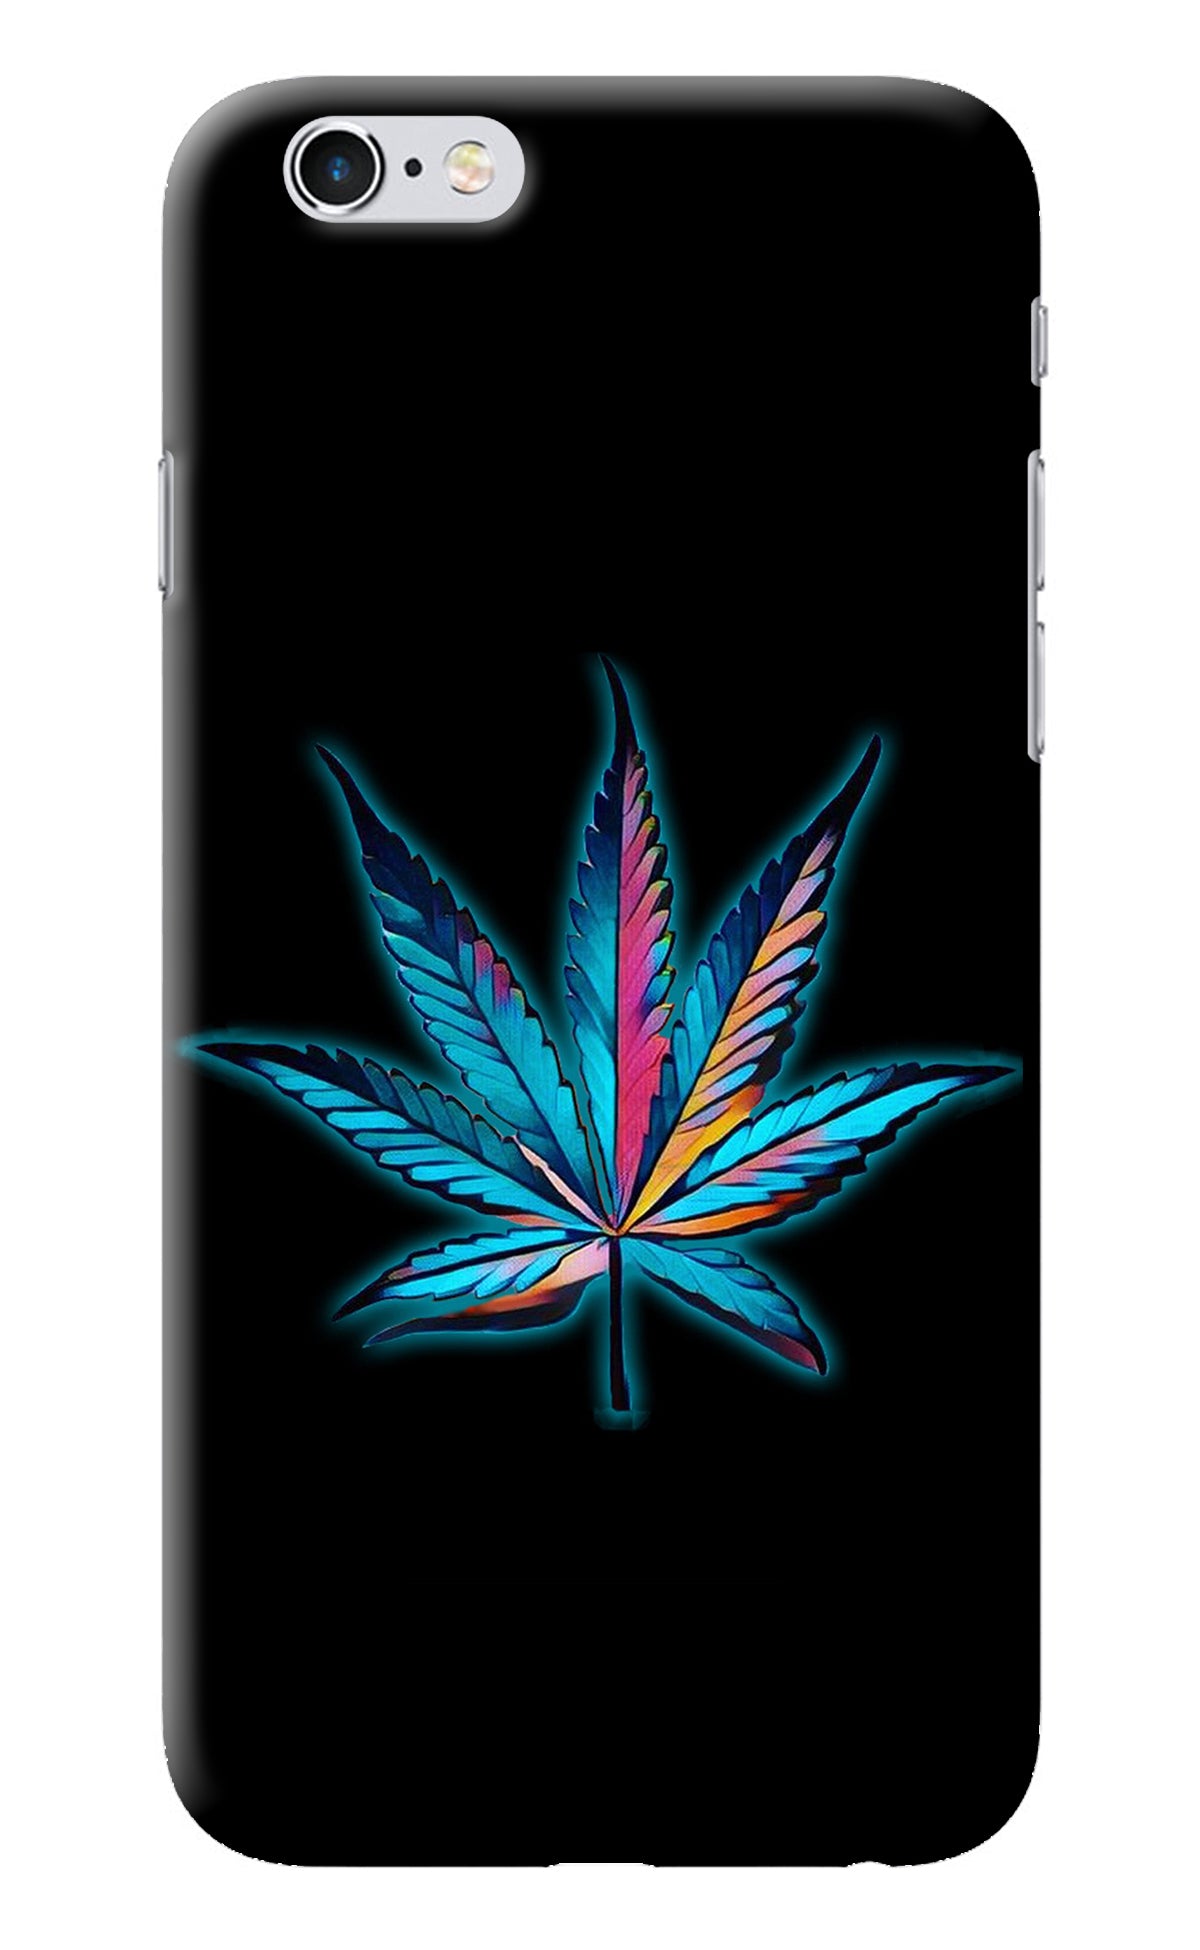 Weed iPhone 6/6s Back Cover